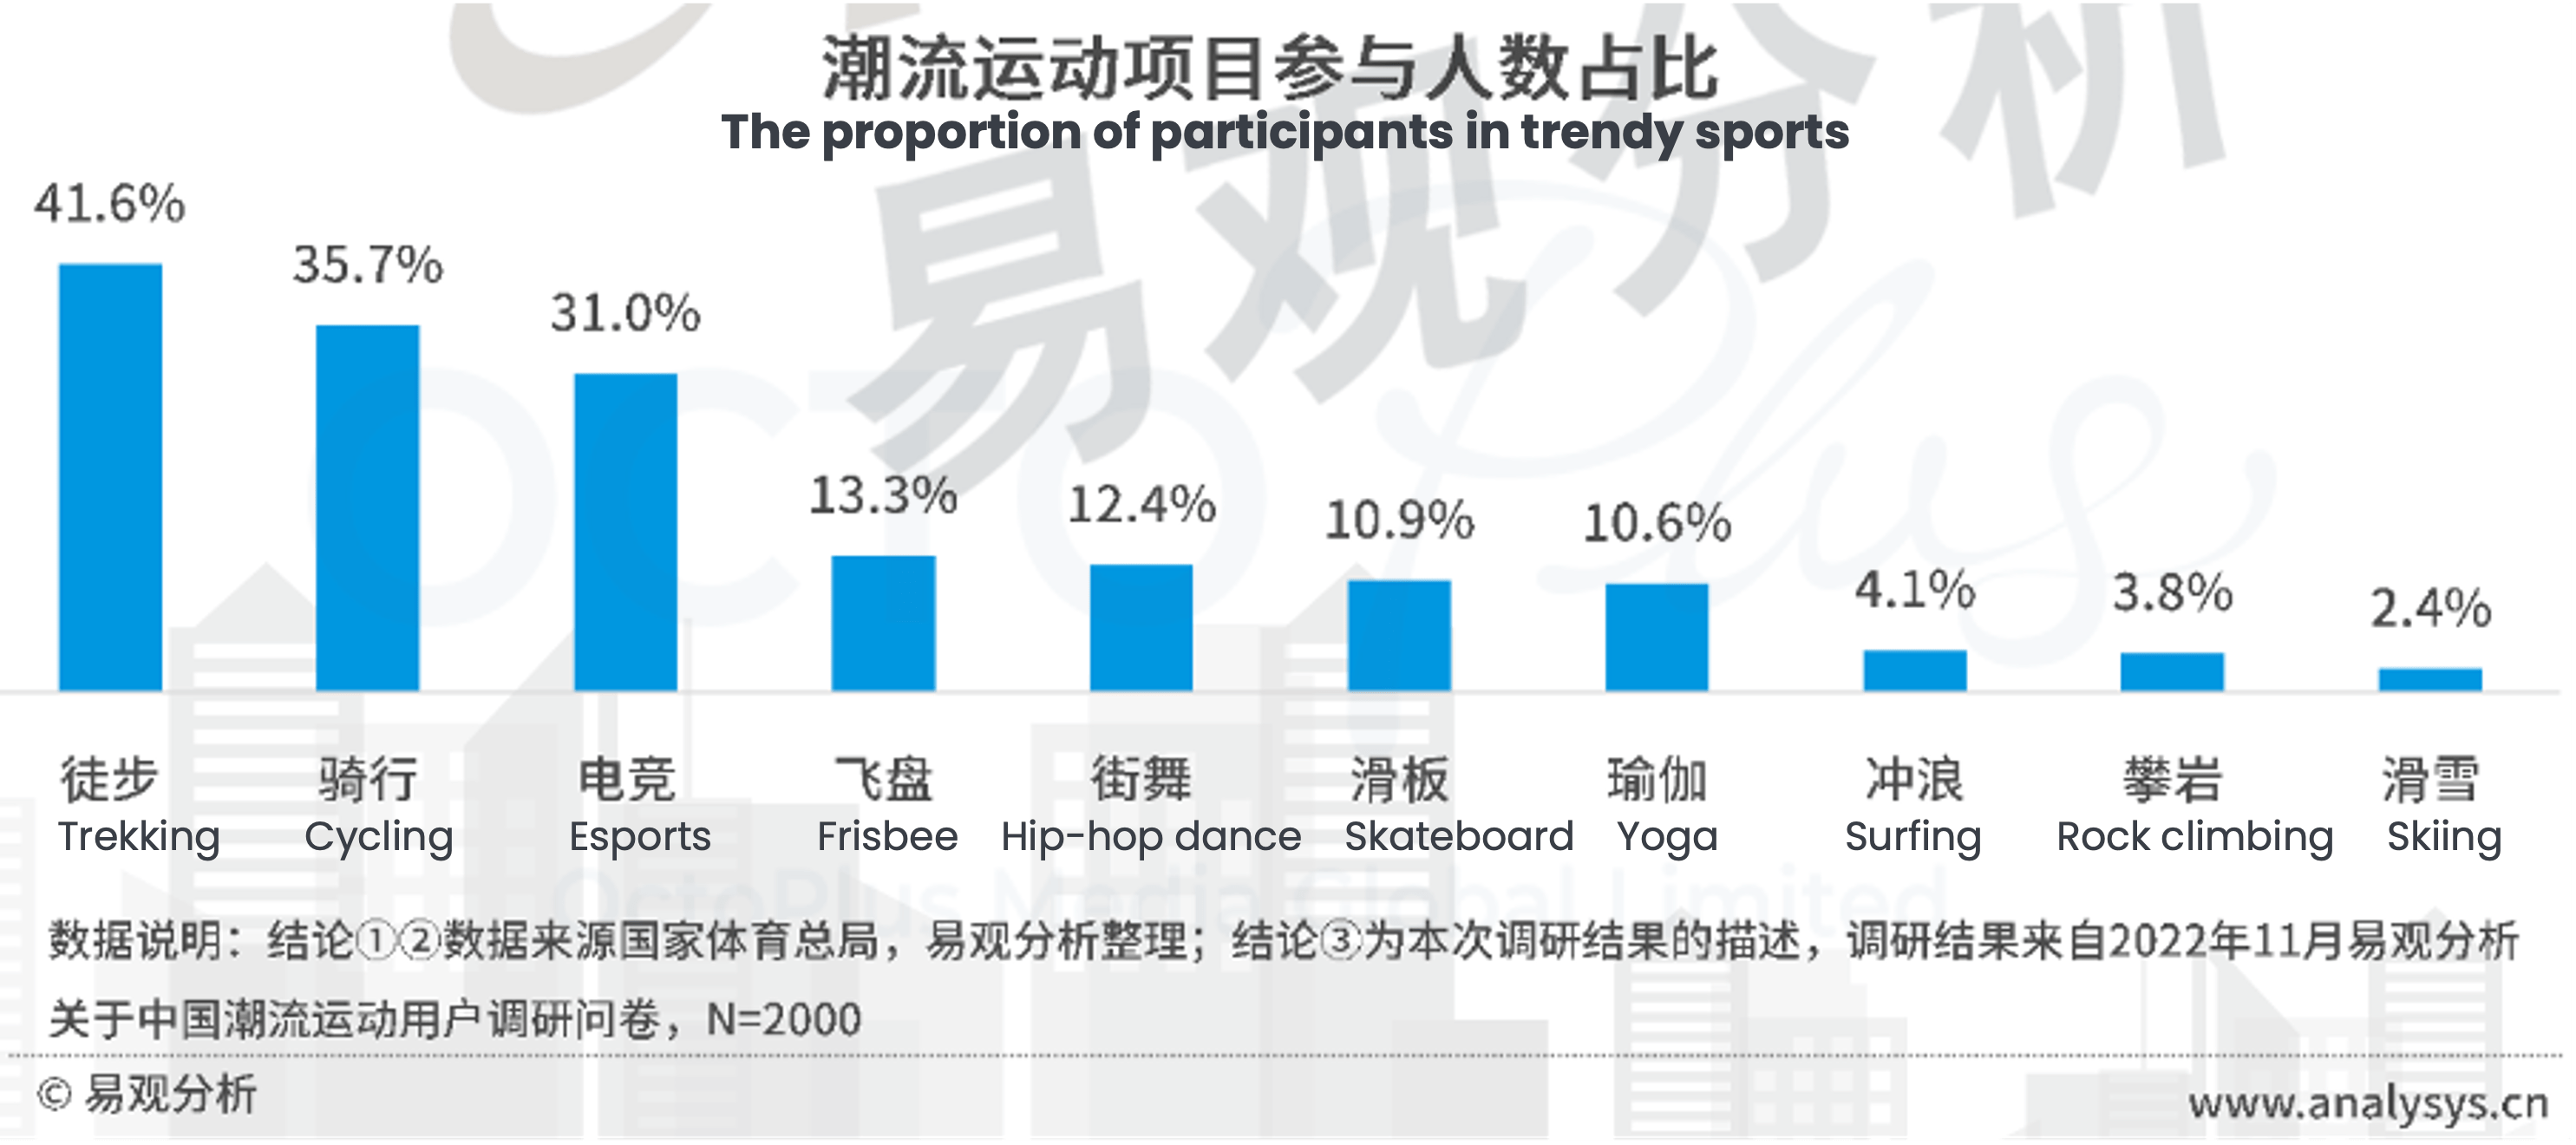 The proportion of participants in trendy sports